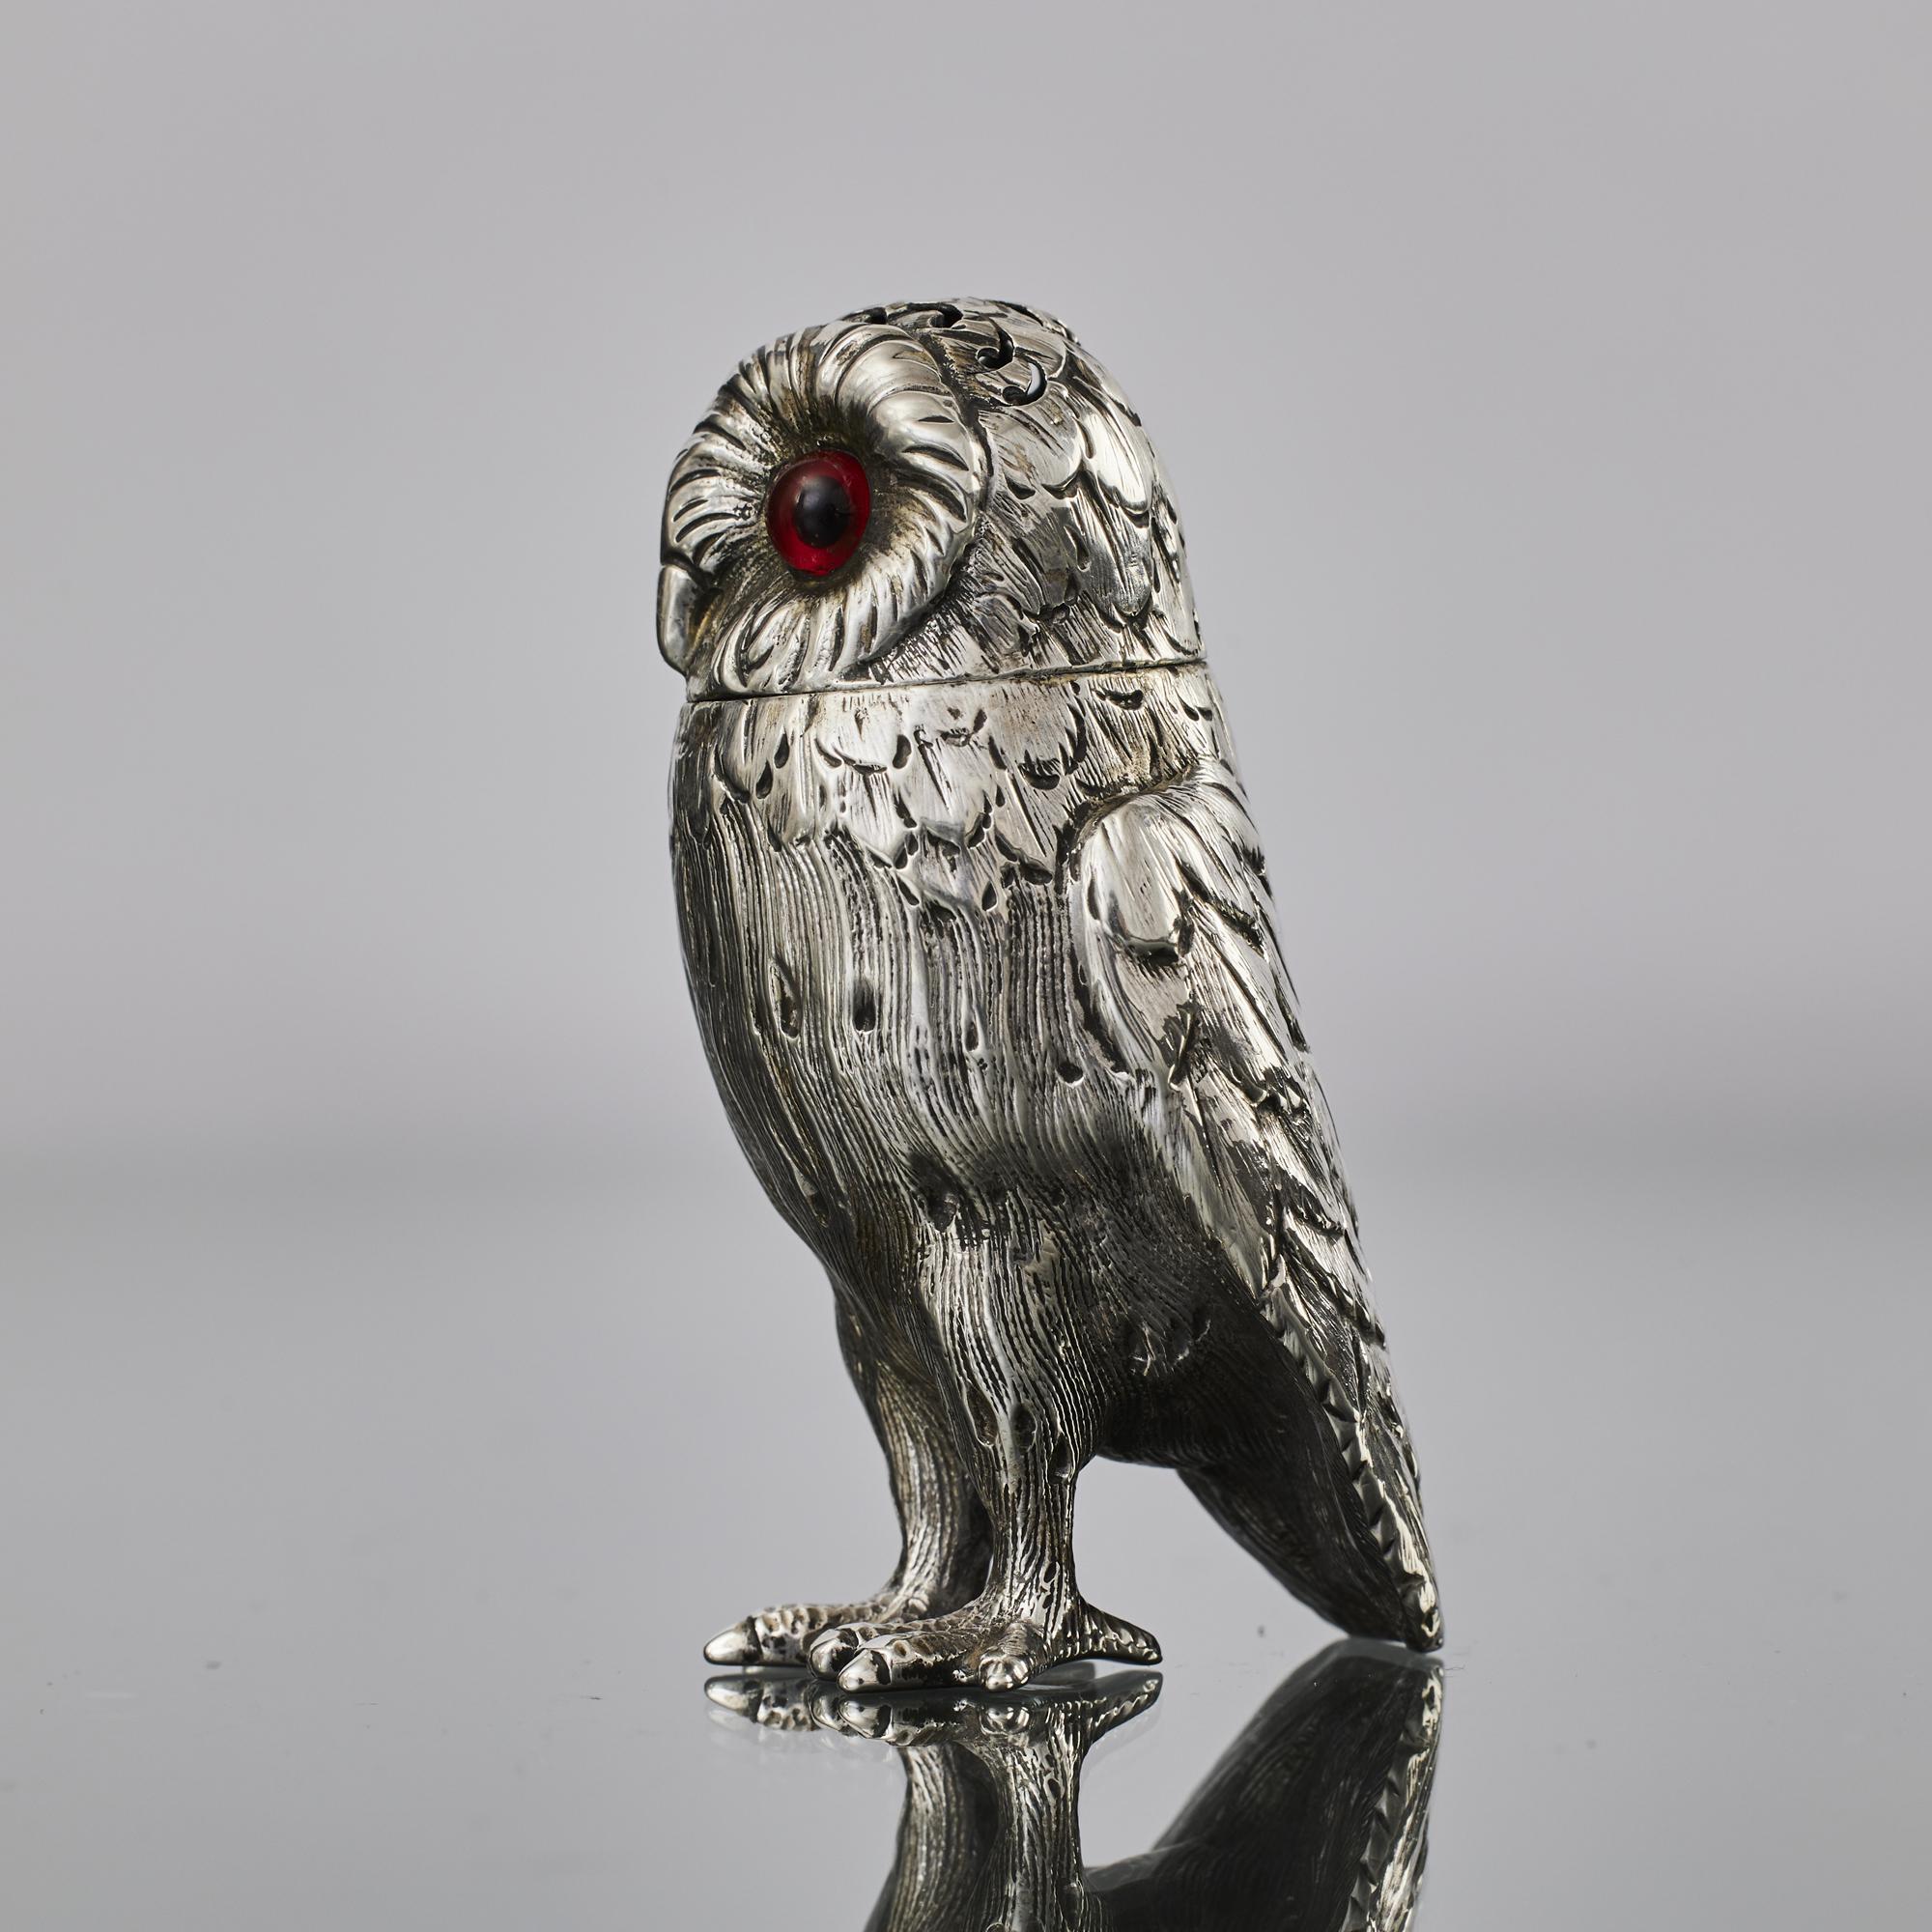 Antique Victorian era silver pepper castor in the form of an owl. The piece has glass eyes inset and has a hand-pierced head.
 
 Known as the king of spices, pepper is one of the oldest and most popular spices in the world as well as the most widely